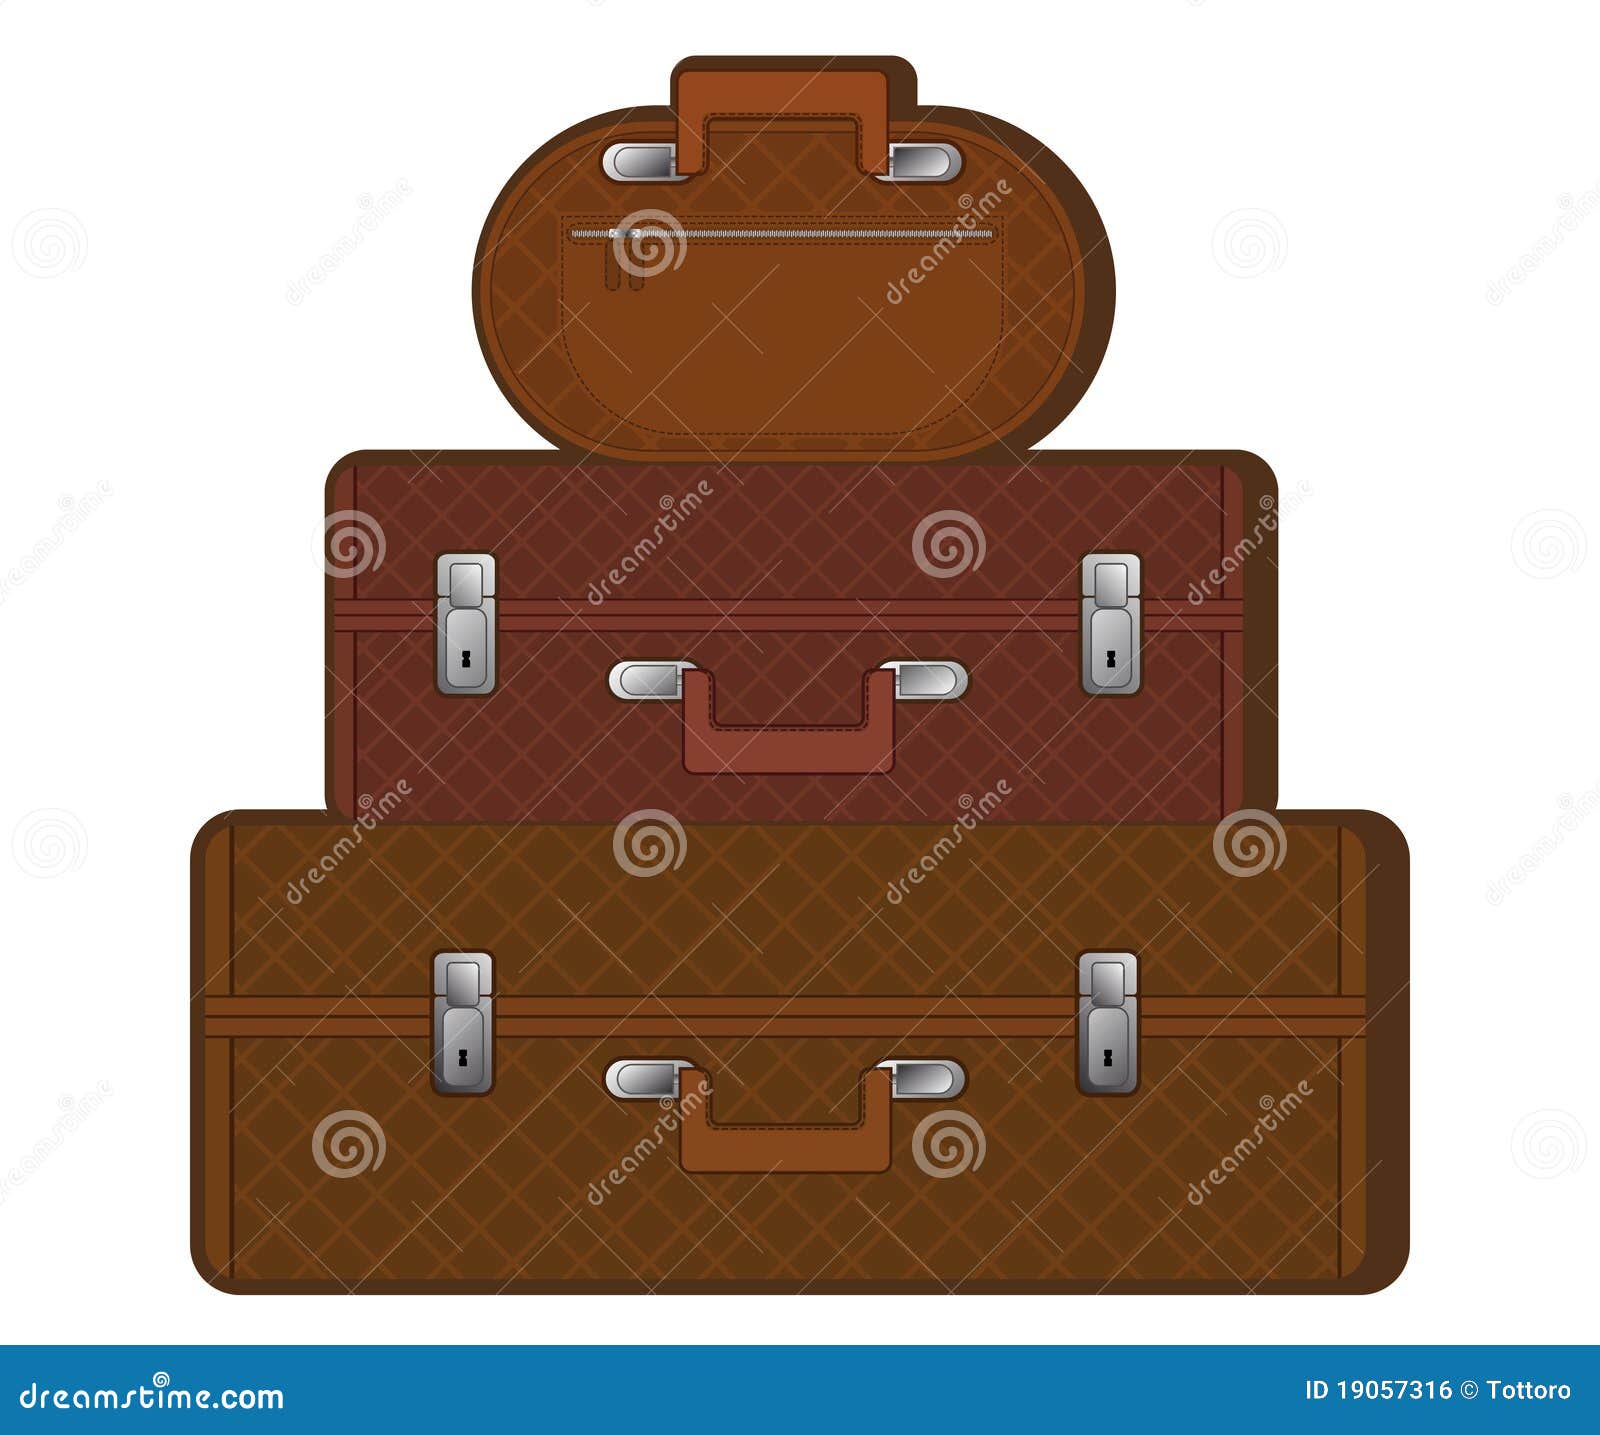 Suitcases Royalty Free Stock Image - Image: 19057316